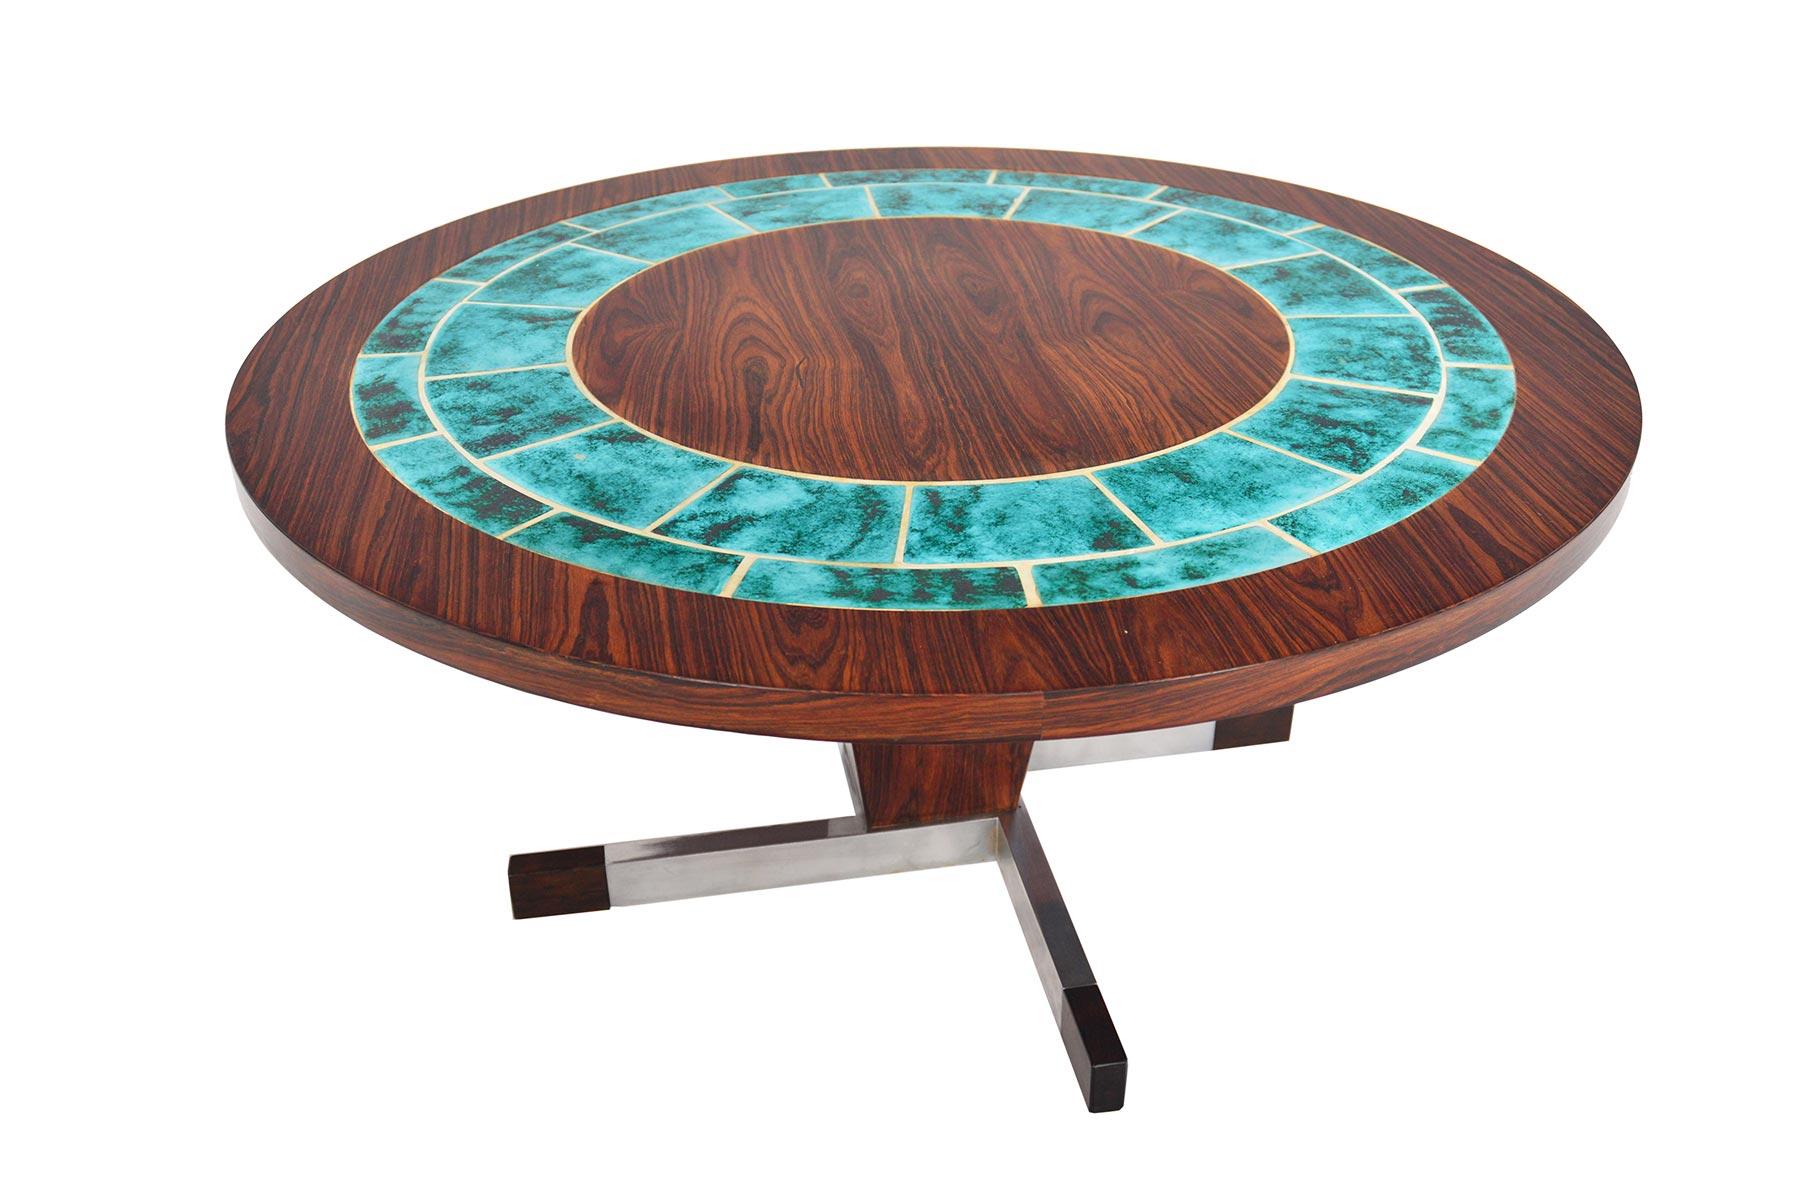 This round Danish modern rosewood coffee table offers eye-catching style and design details. The round rosewood top is inlaid with turquoise ceramic tiles and stands on a rosewood and steel base capped in rosewood. In excellent original